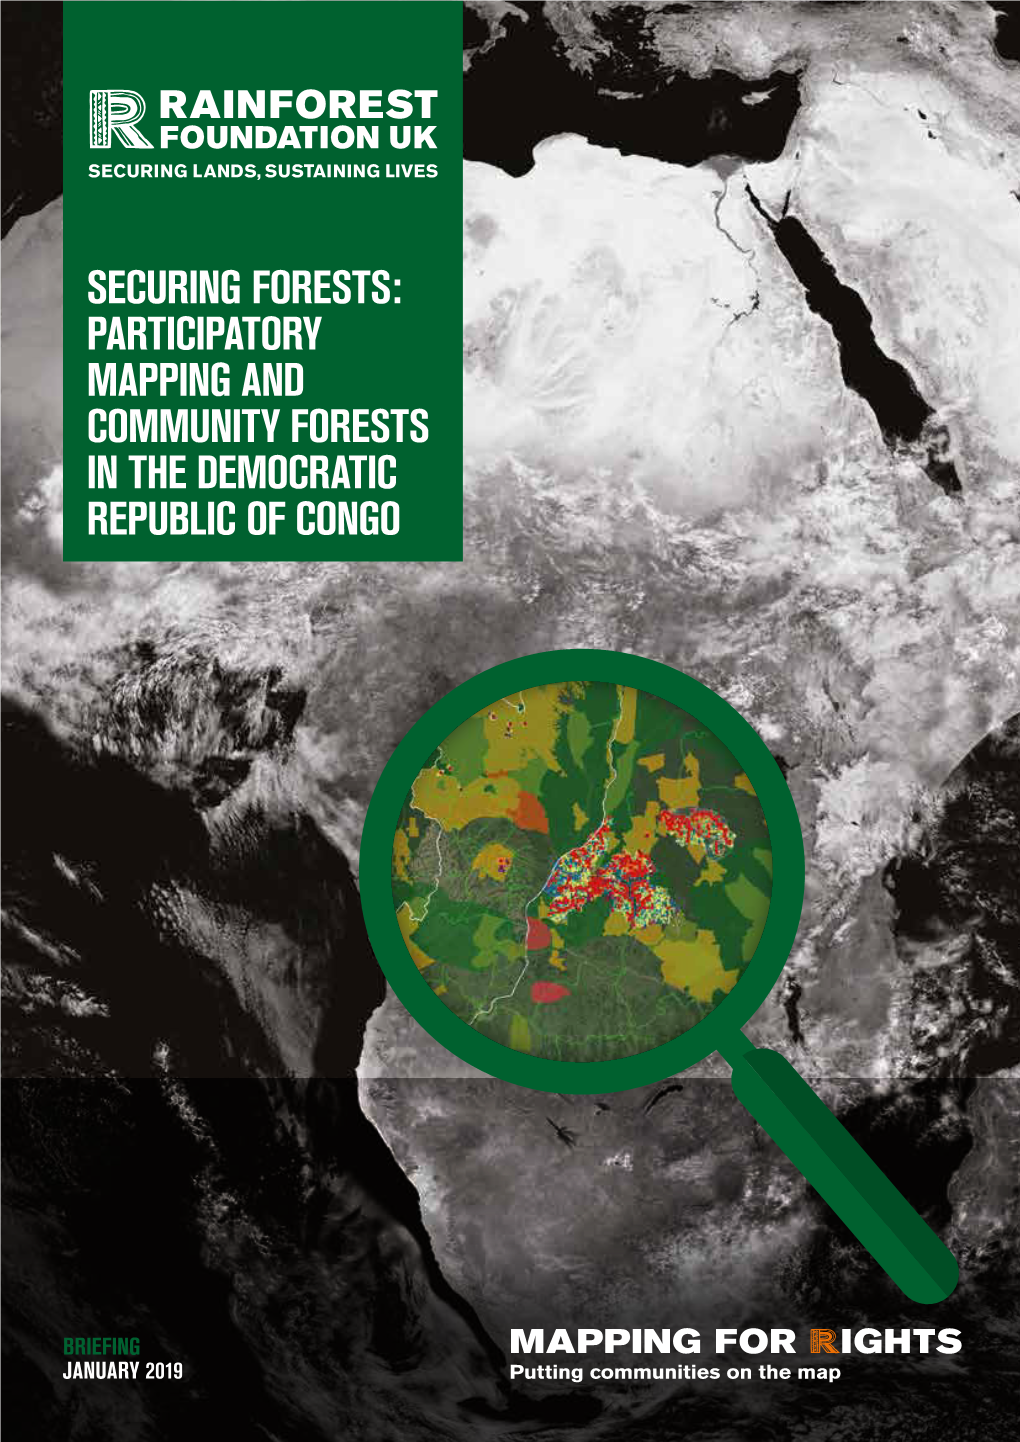 Participatory Mapping and Community Forests in the Democratic Republic of Congo